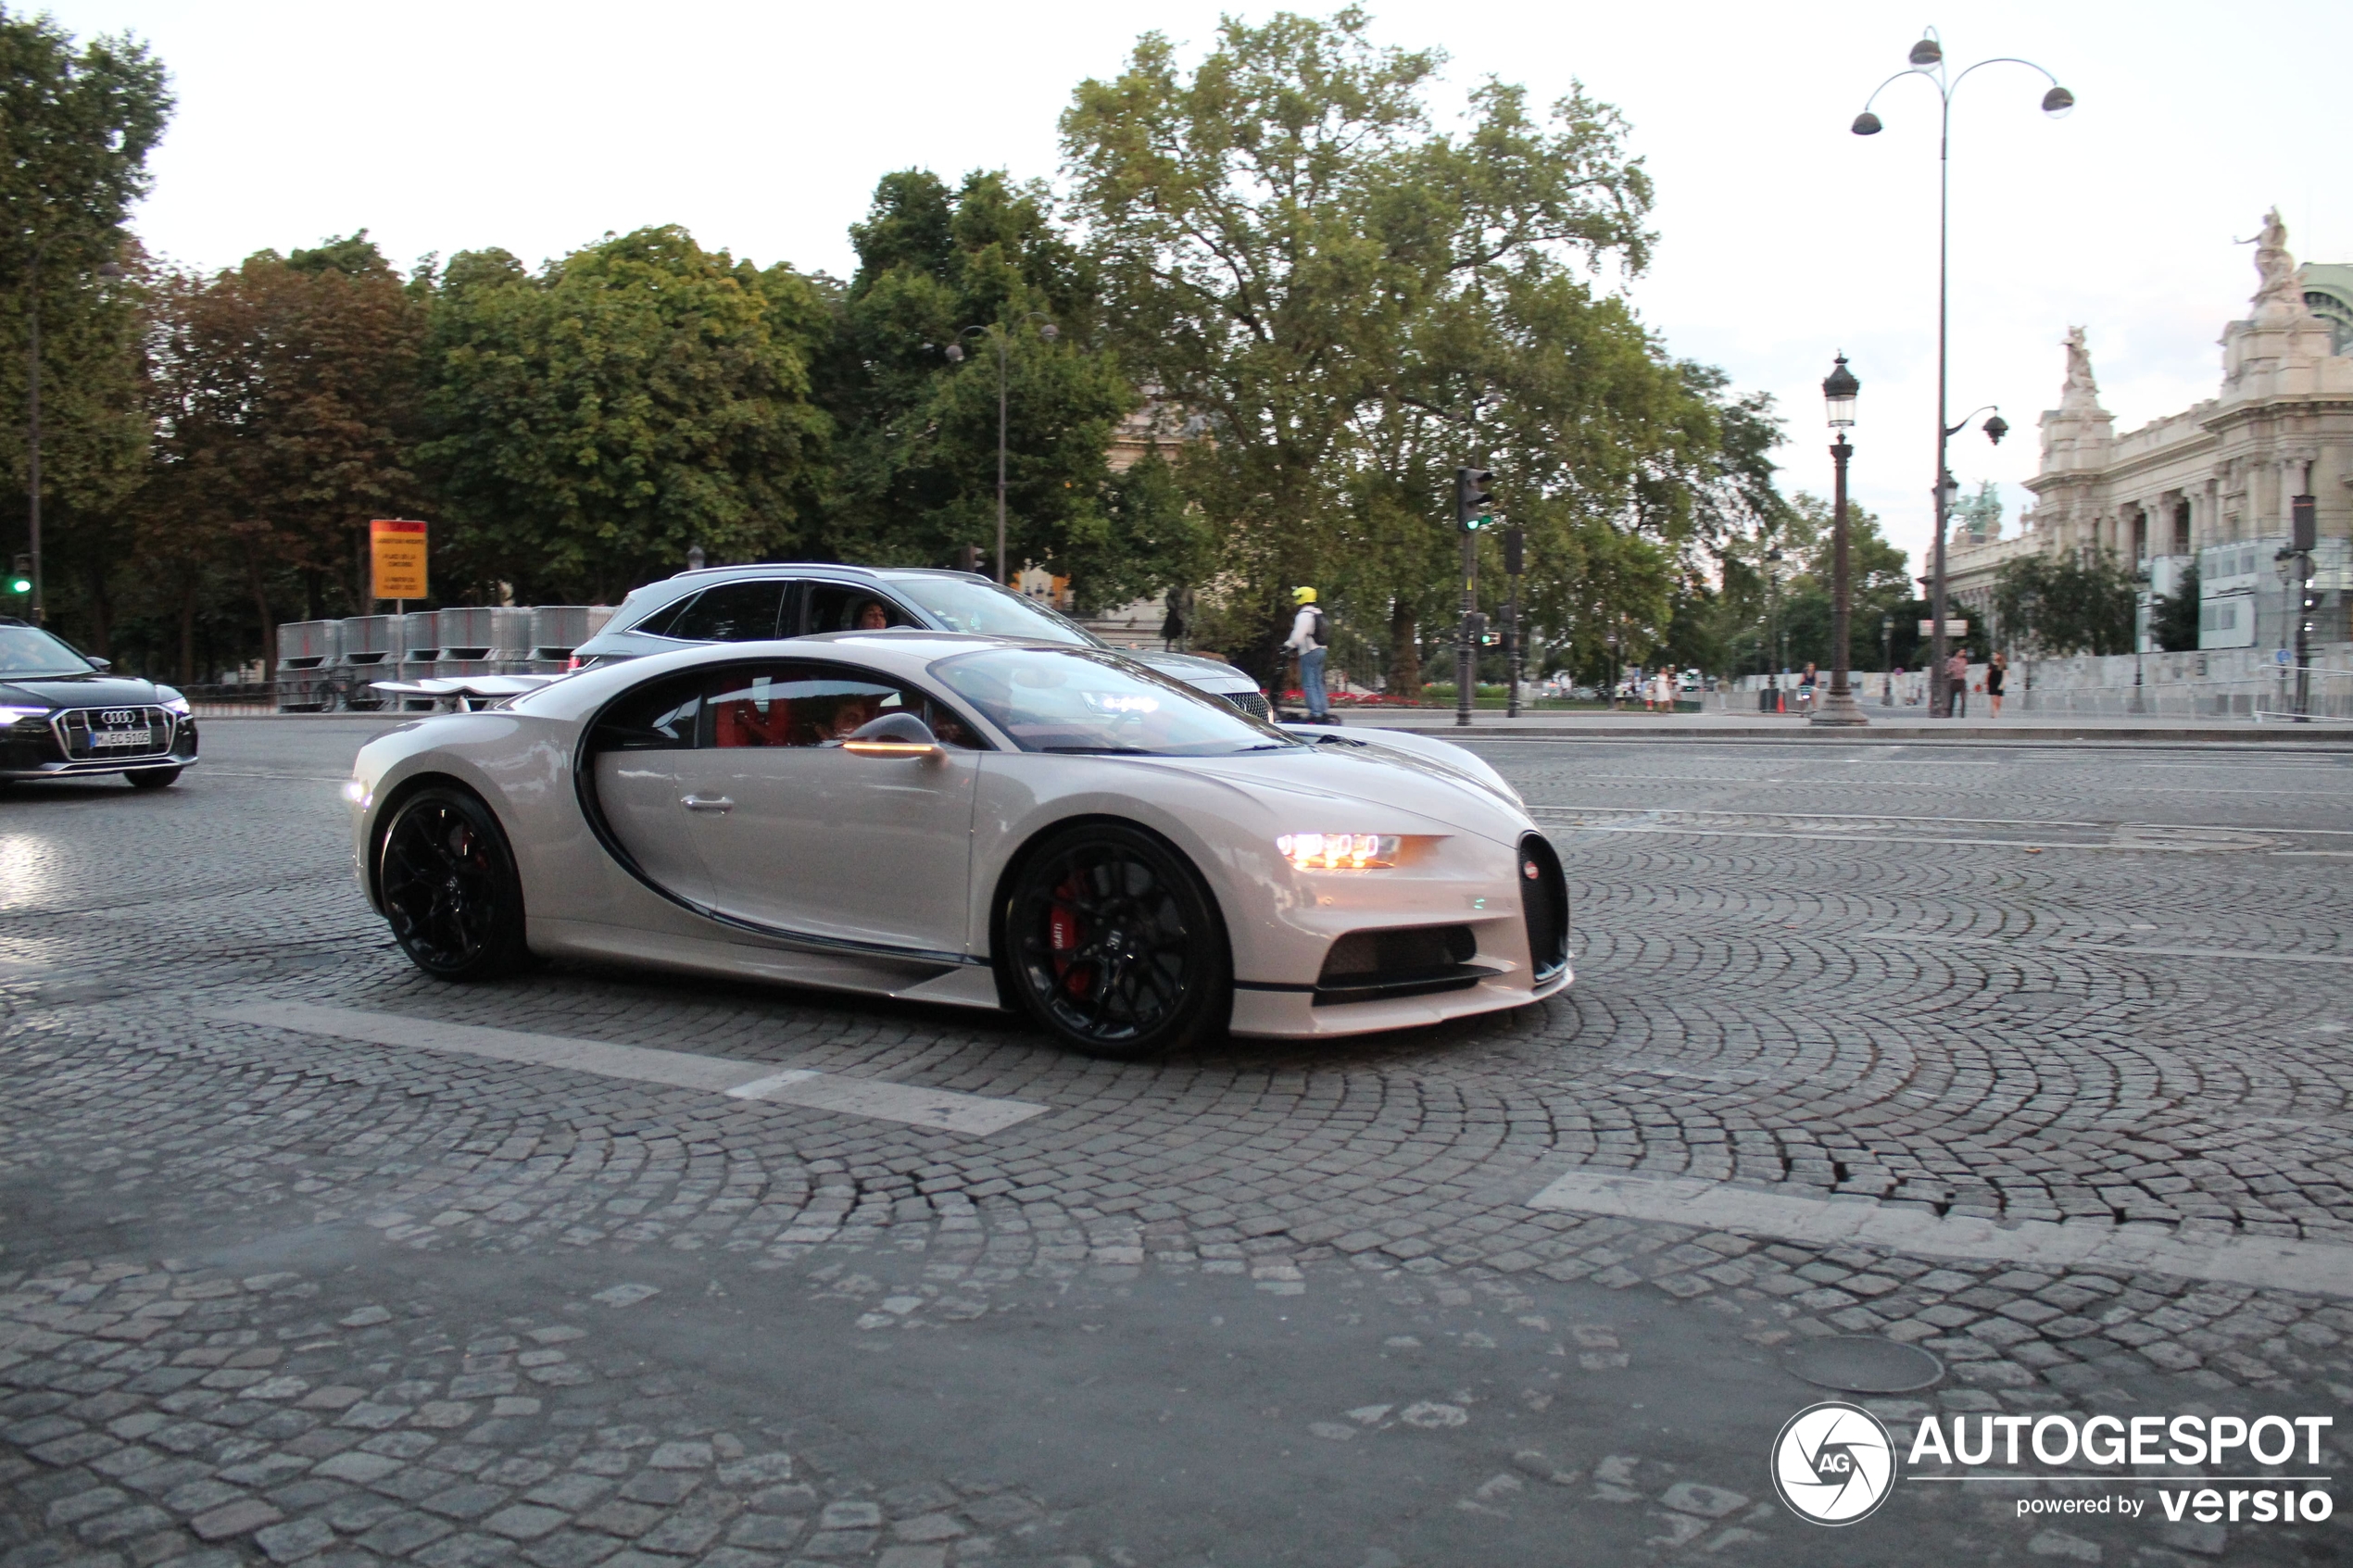 A Chiron shows up in paris during a beautiful sunset